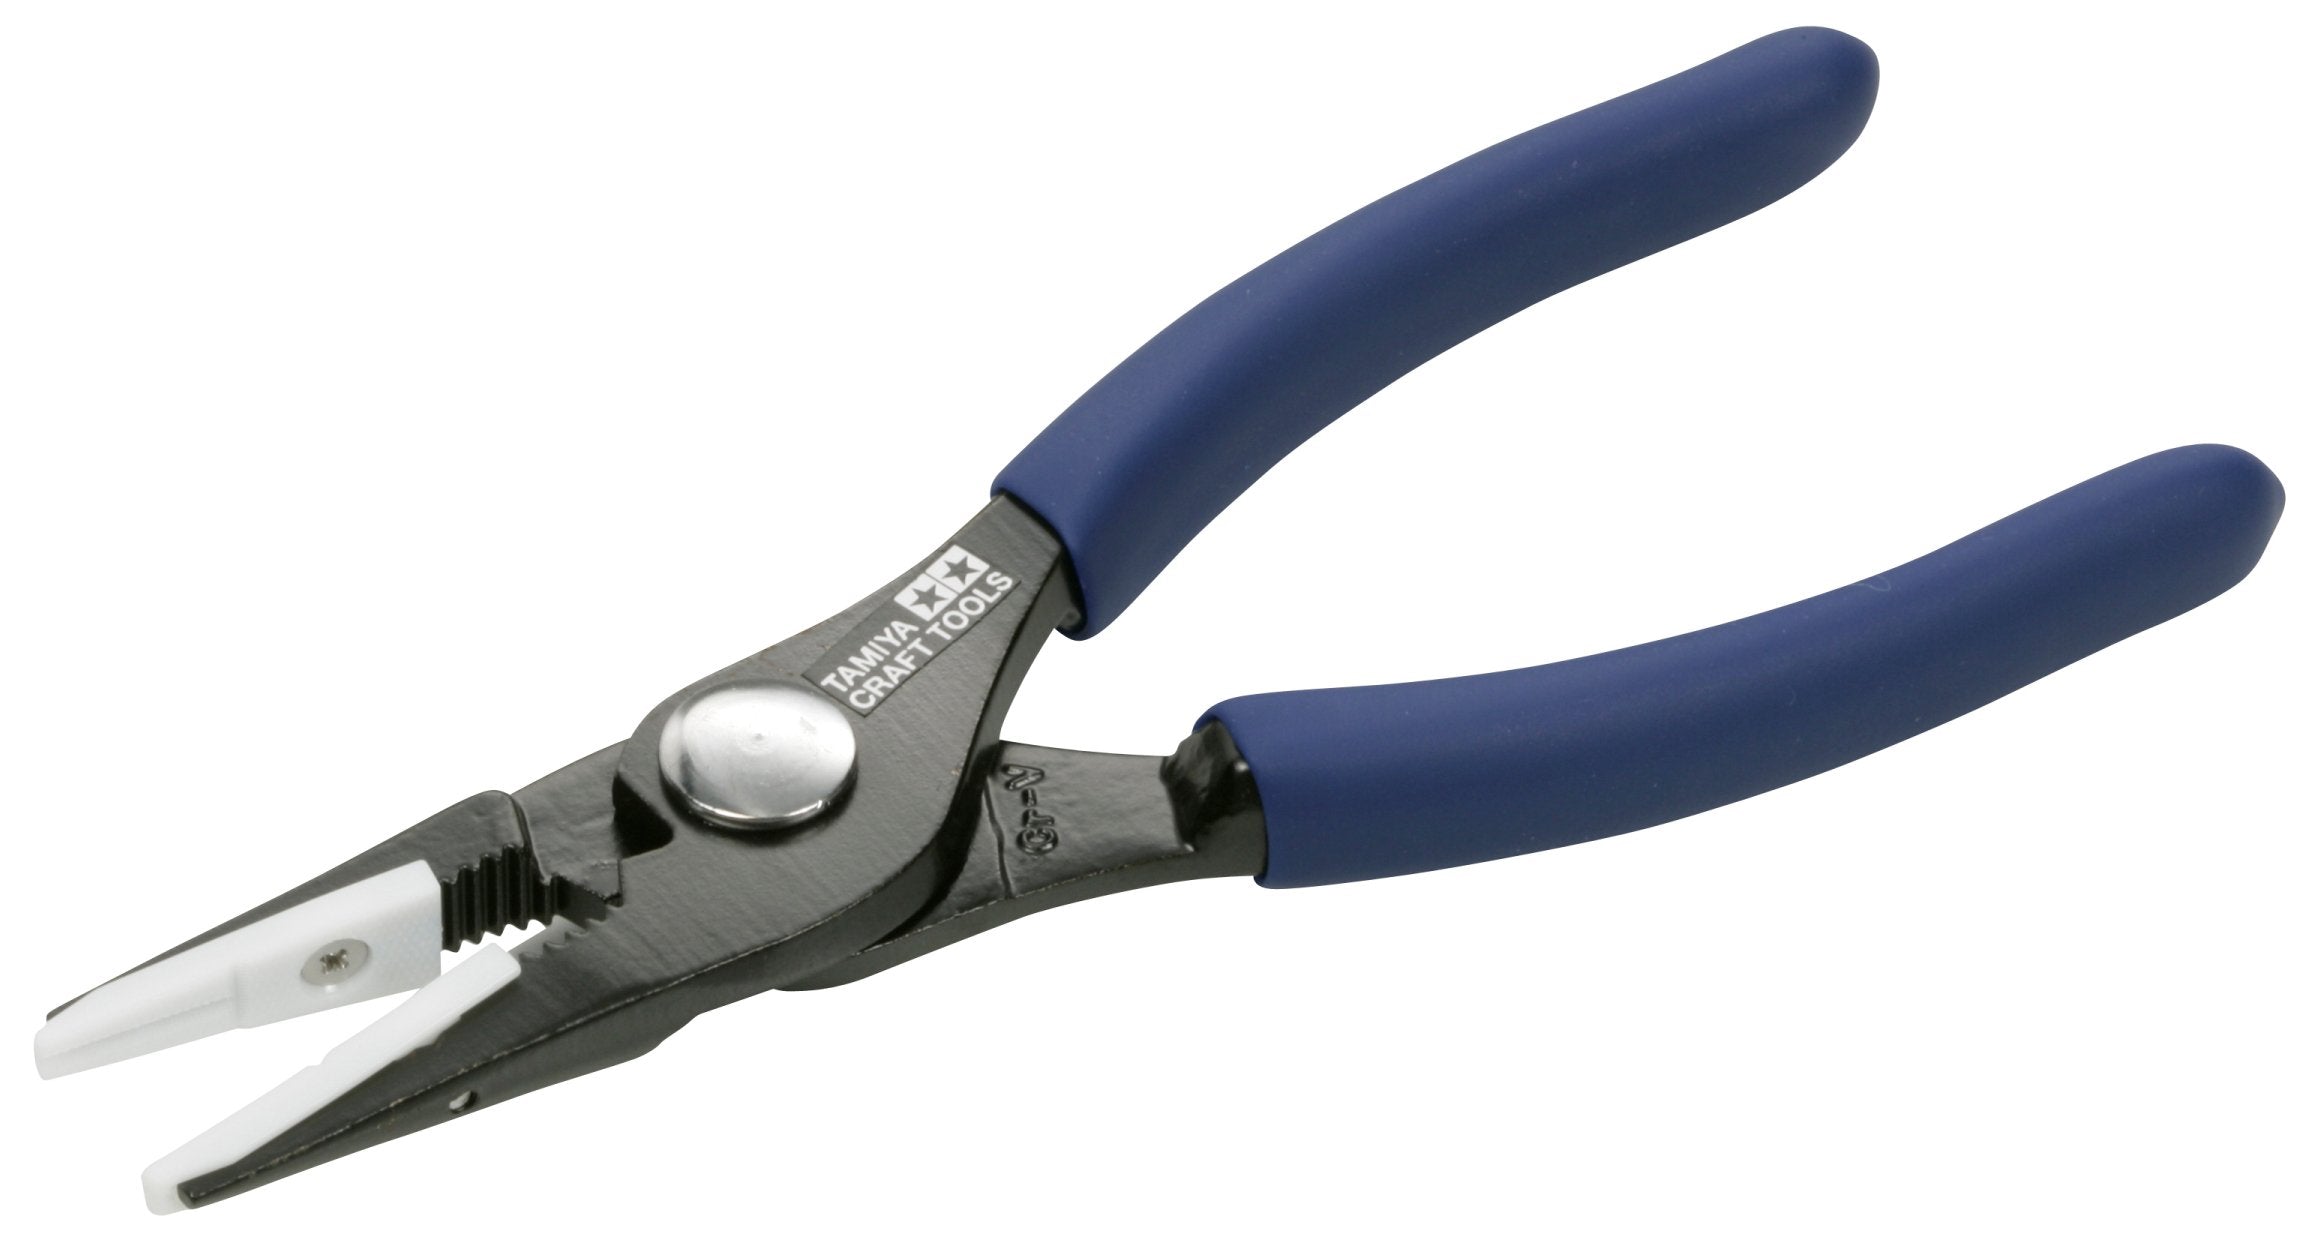 TAMIYA 74065 Craft Tools Non-Scratch Long Nose Pliers